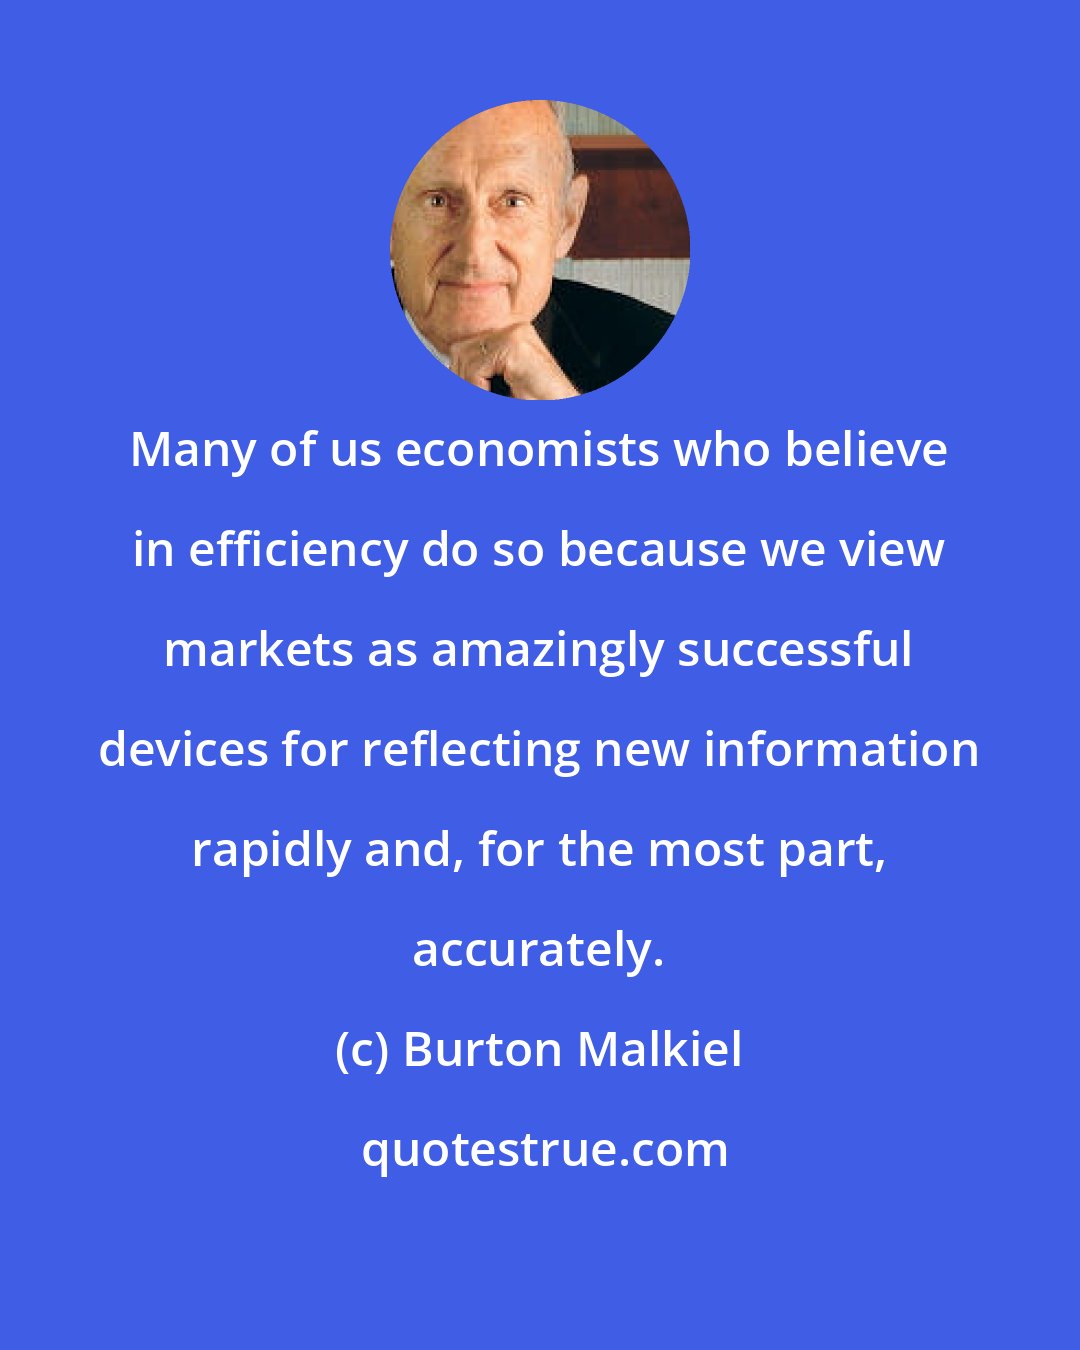 Burton Malkiel: Many of us economists who believe in efficiency do so because we view markets as amazingly successful devices for reflecting new information rapidly and, for the most part, accurately.